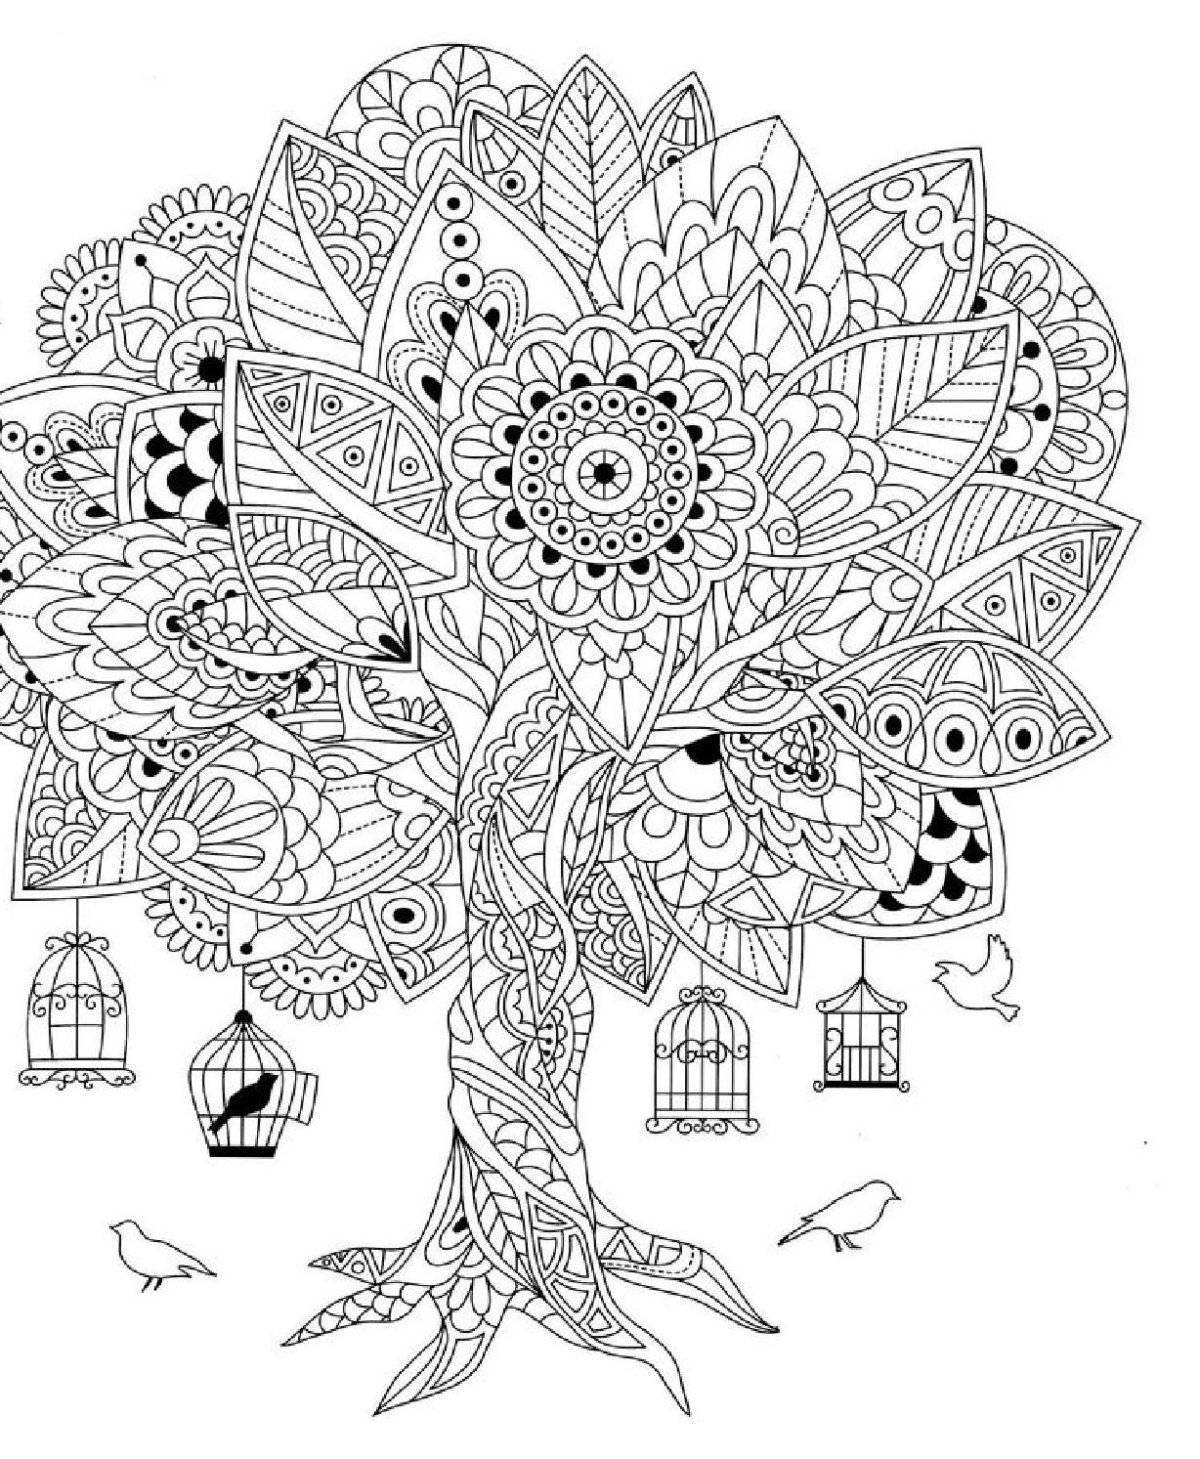 Calming coloring book relaxation for children